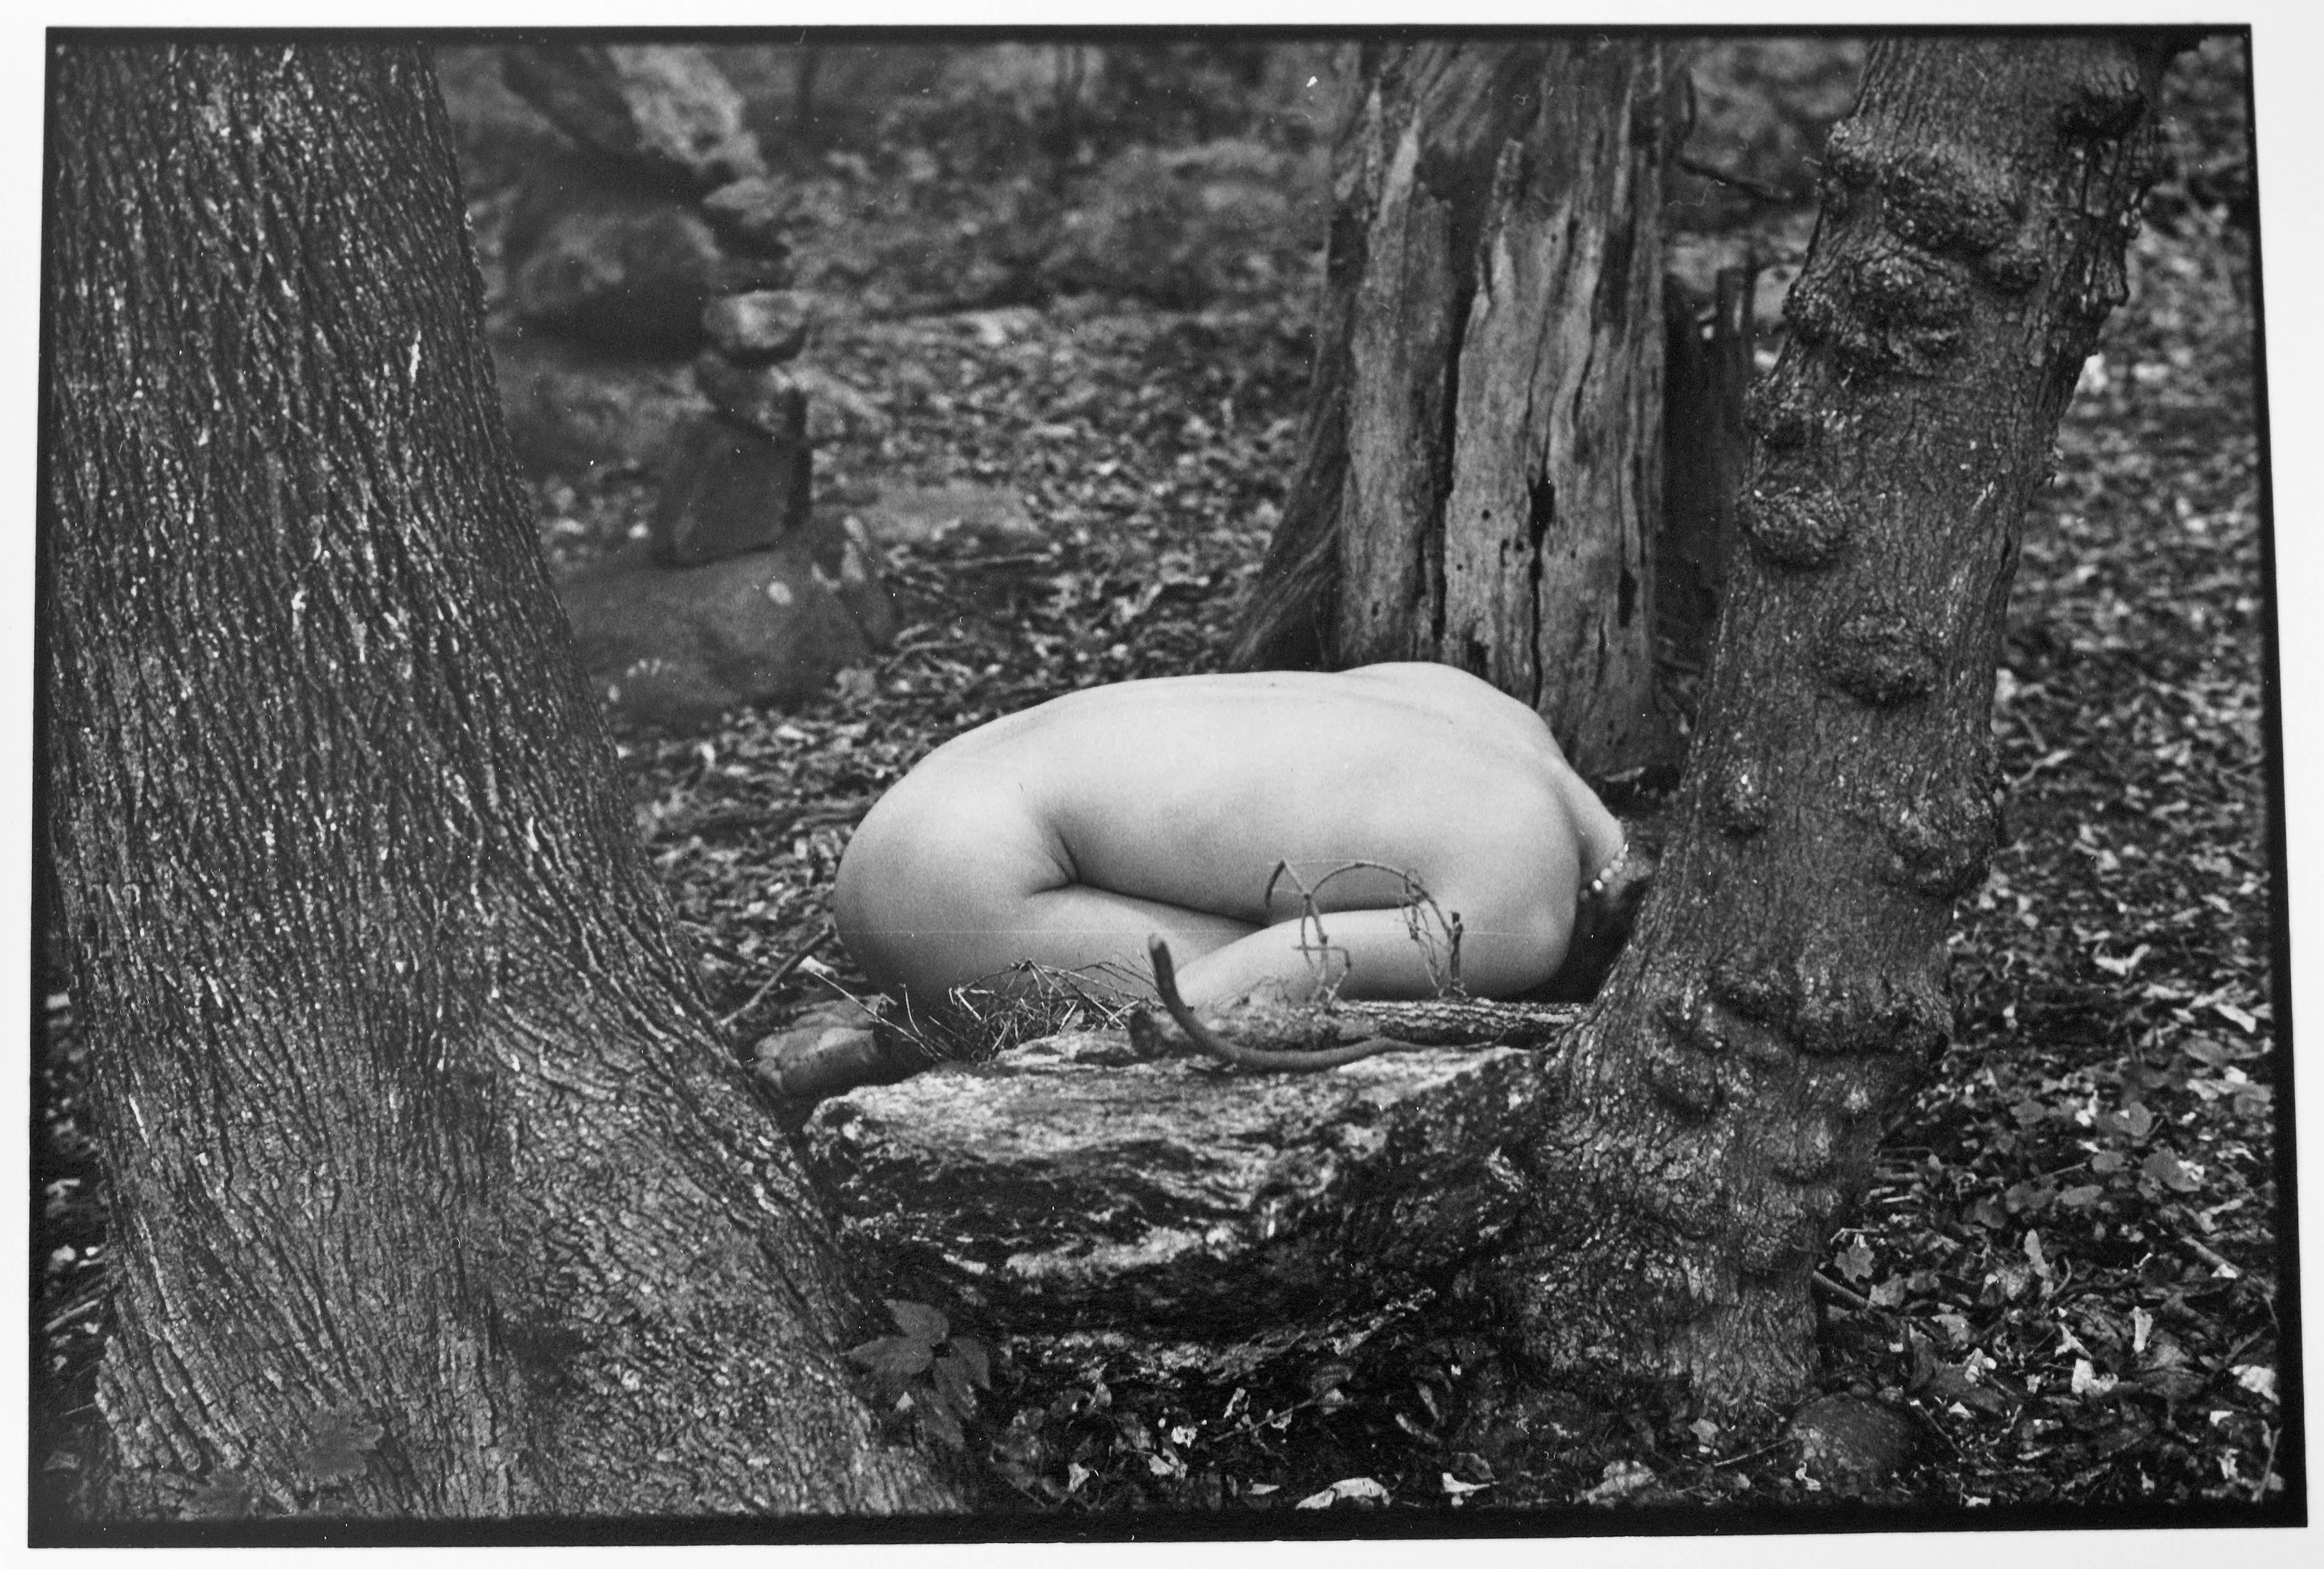 Kate #5, Vintage Black and White Photograph of Nude in the Forest